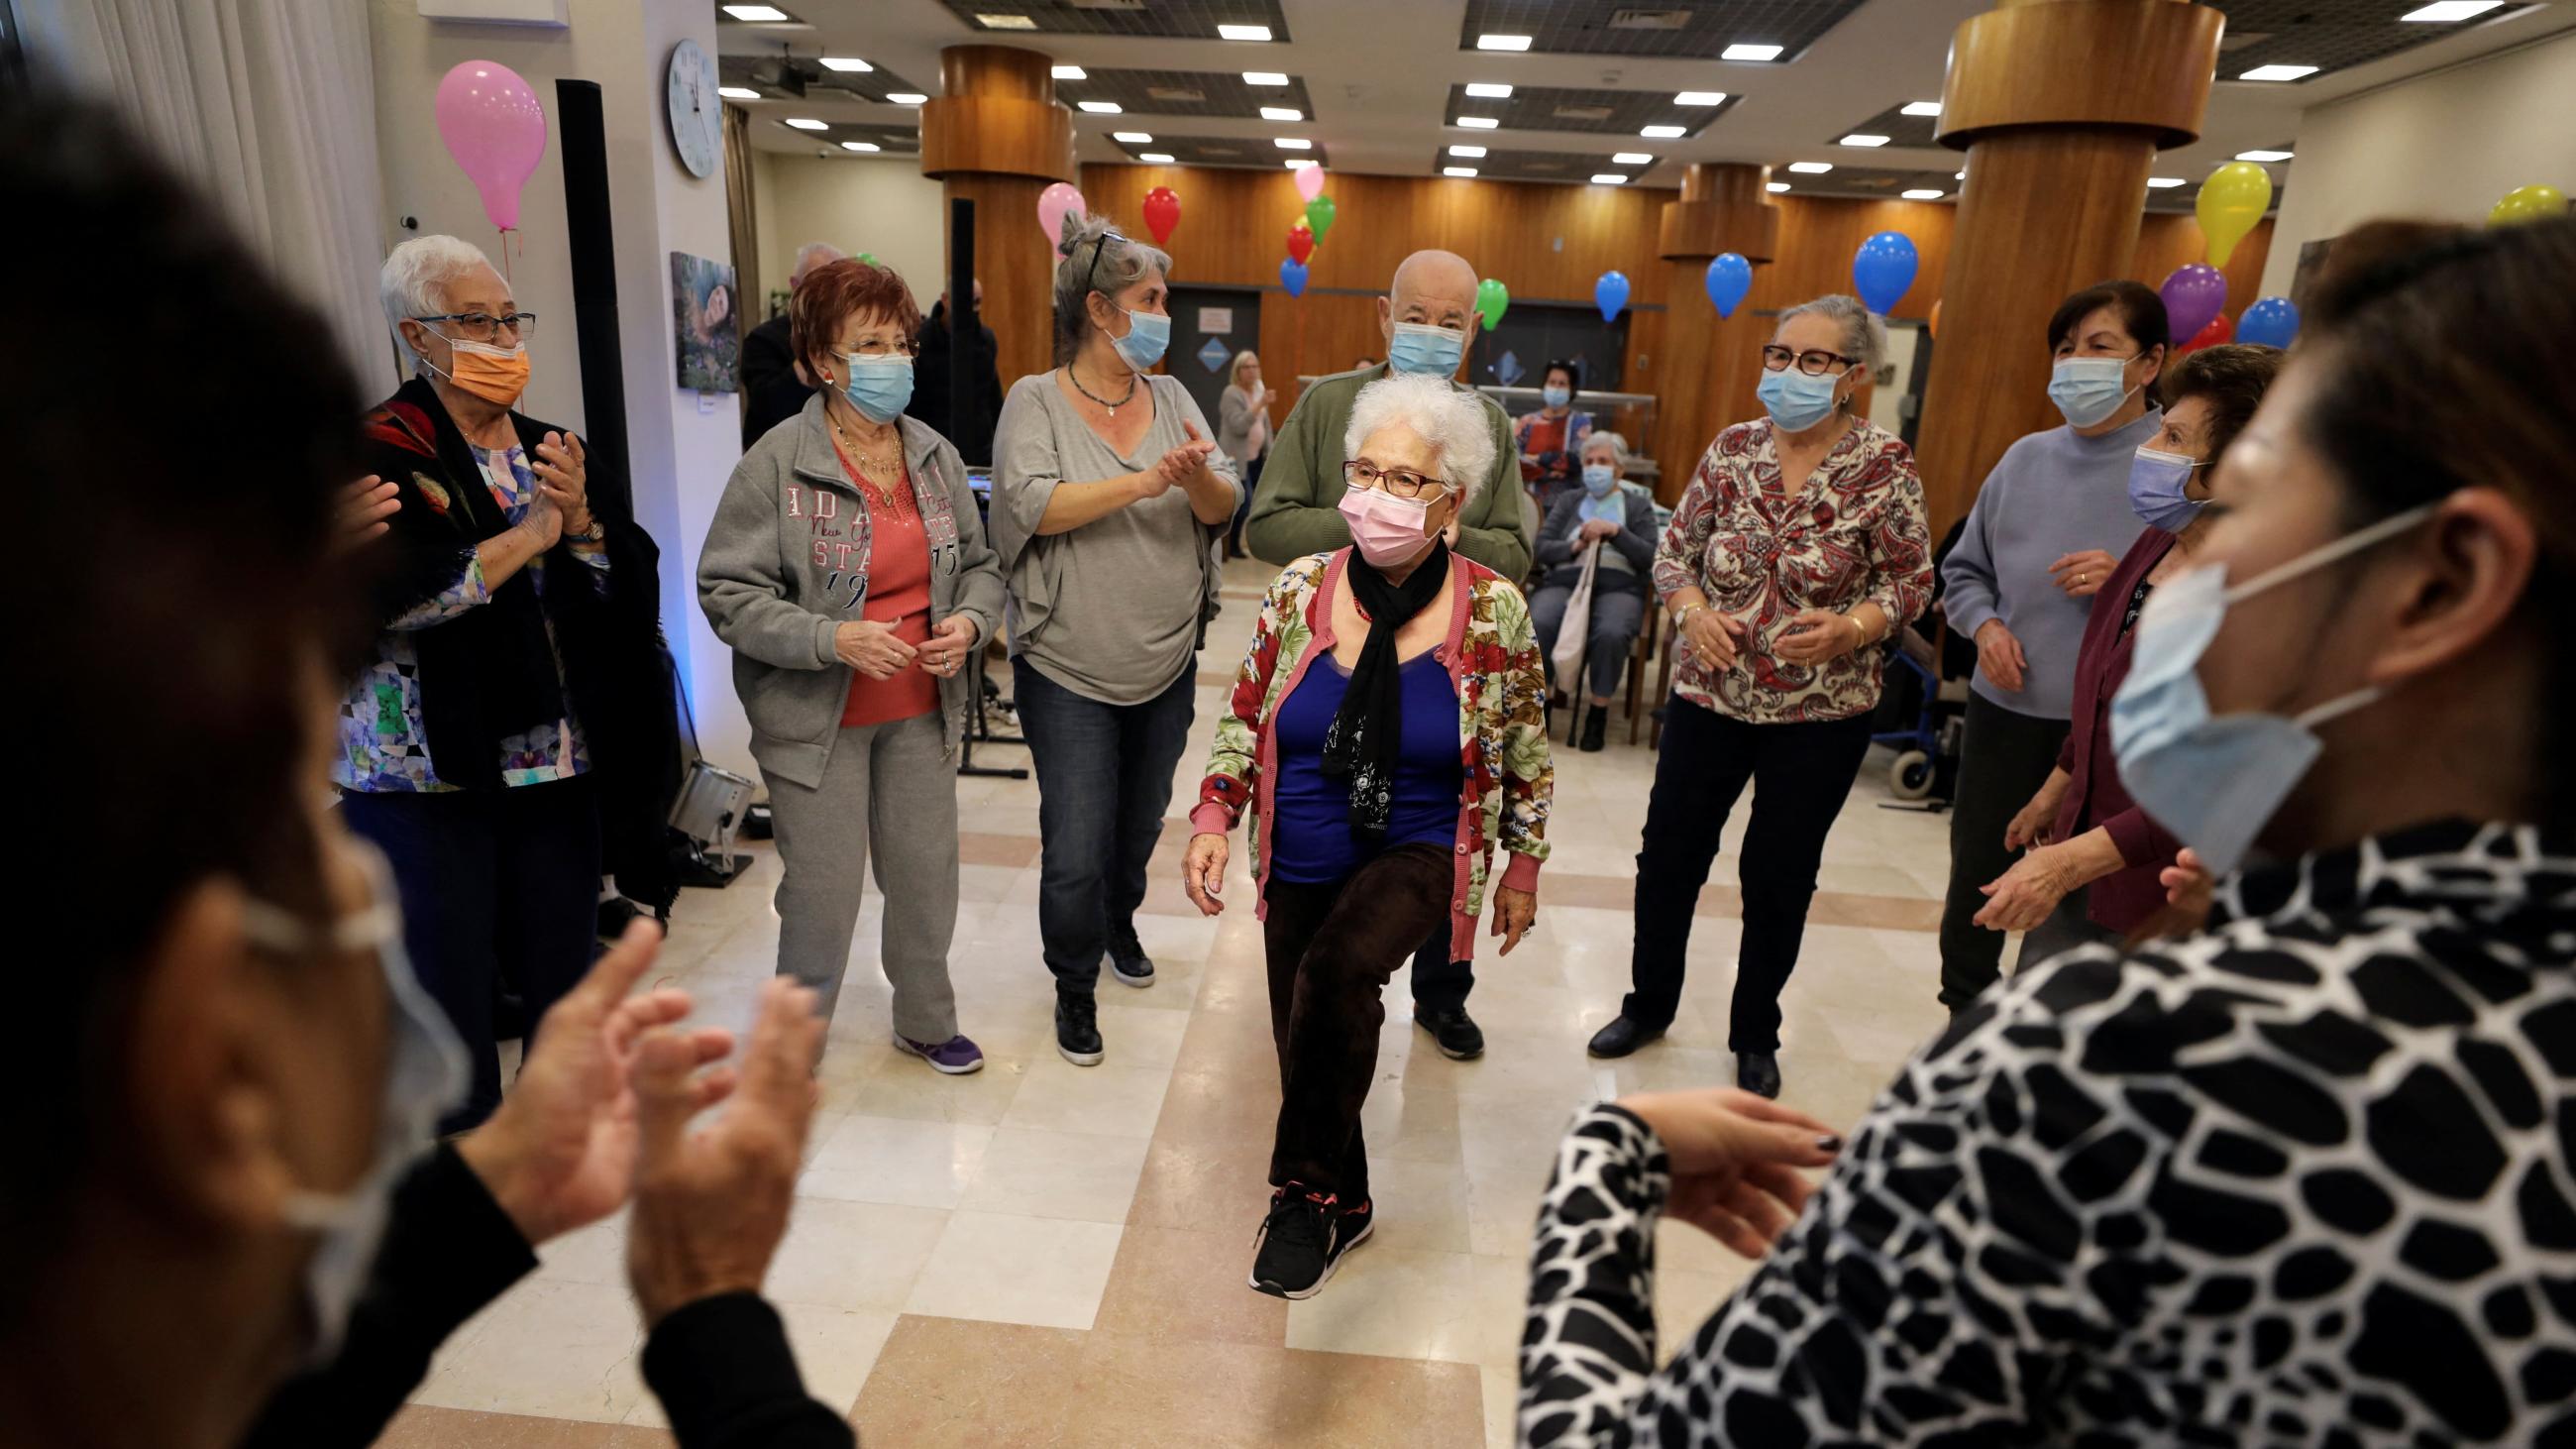 Eighty-three-year-old Rachel Gershom and other senior citizens dance at a vaccination party before they receive a fourth dose of the COVID-19 vaccine after Israel approved a second booster shot for the immunocompromised, people over sixty years, and medical staff, in a retirement home, in Netanya, Israel, on January 5, 2022.